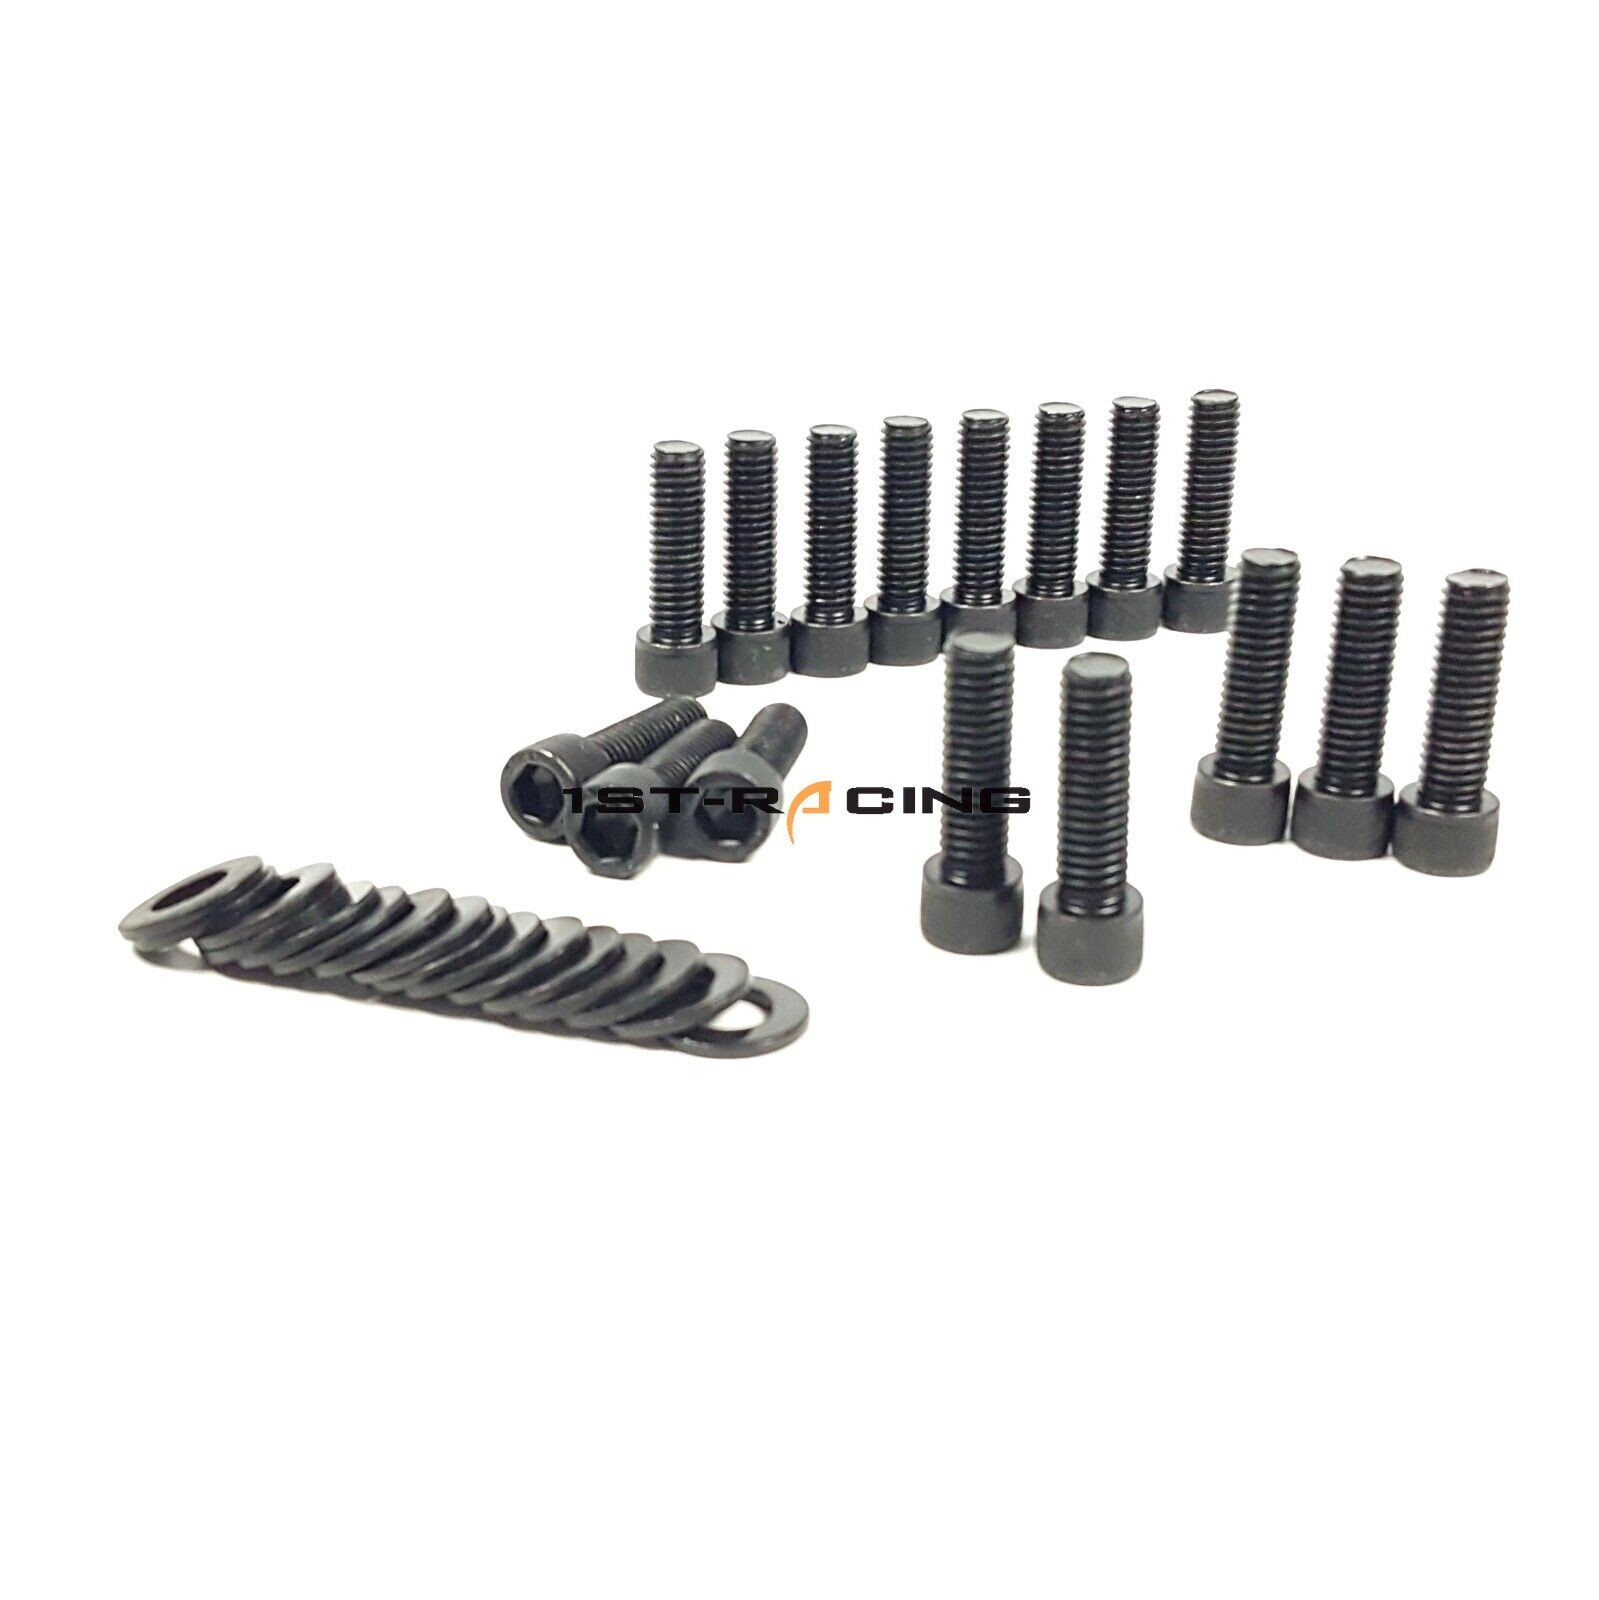 For BBC Intake Manifold Bolt 16pcs fit Compatible Big Block Chevy GM 348 396 402